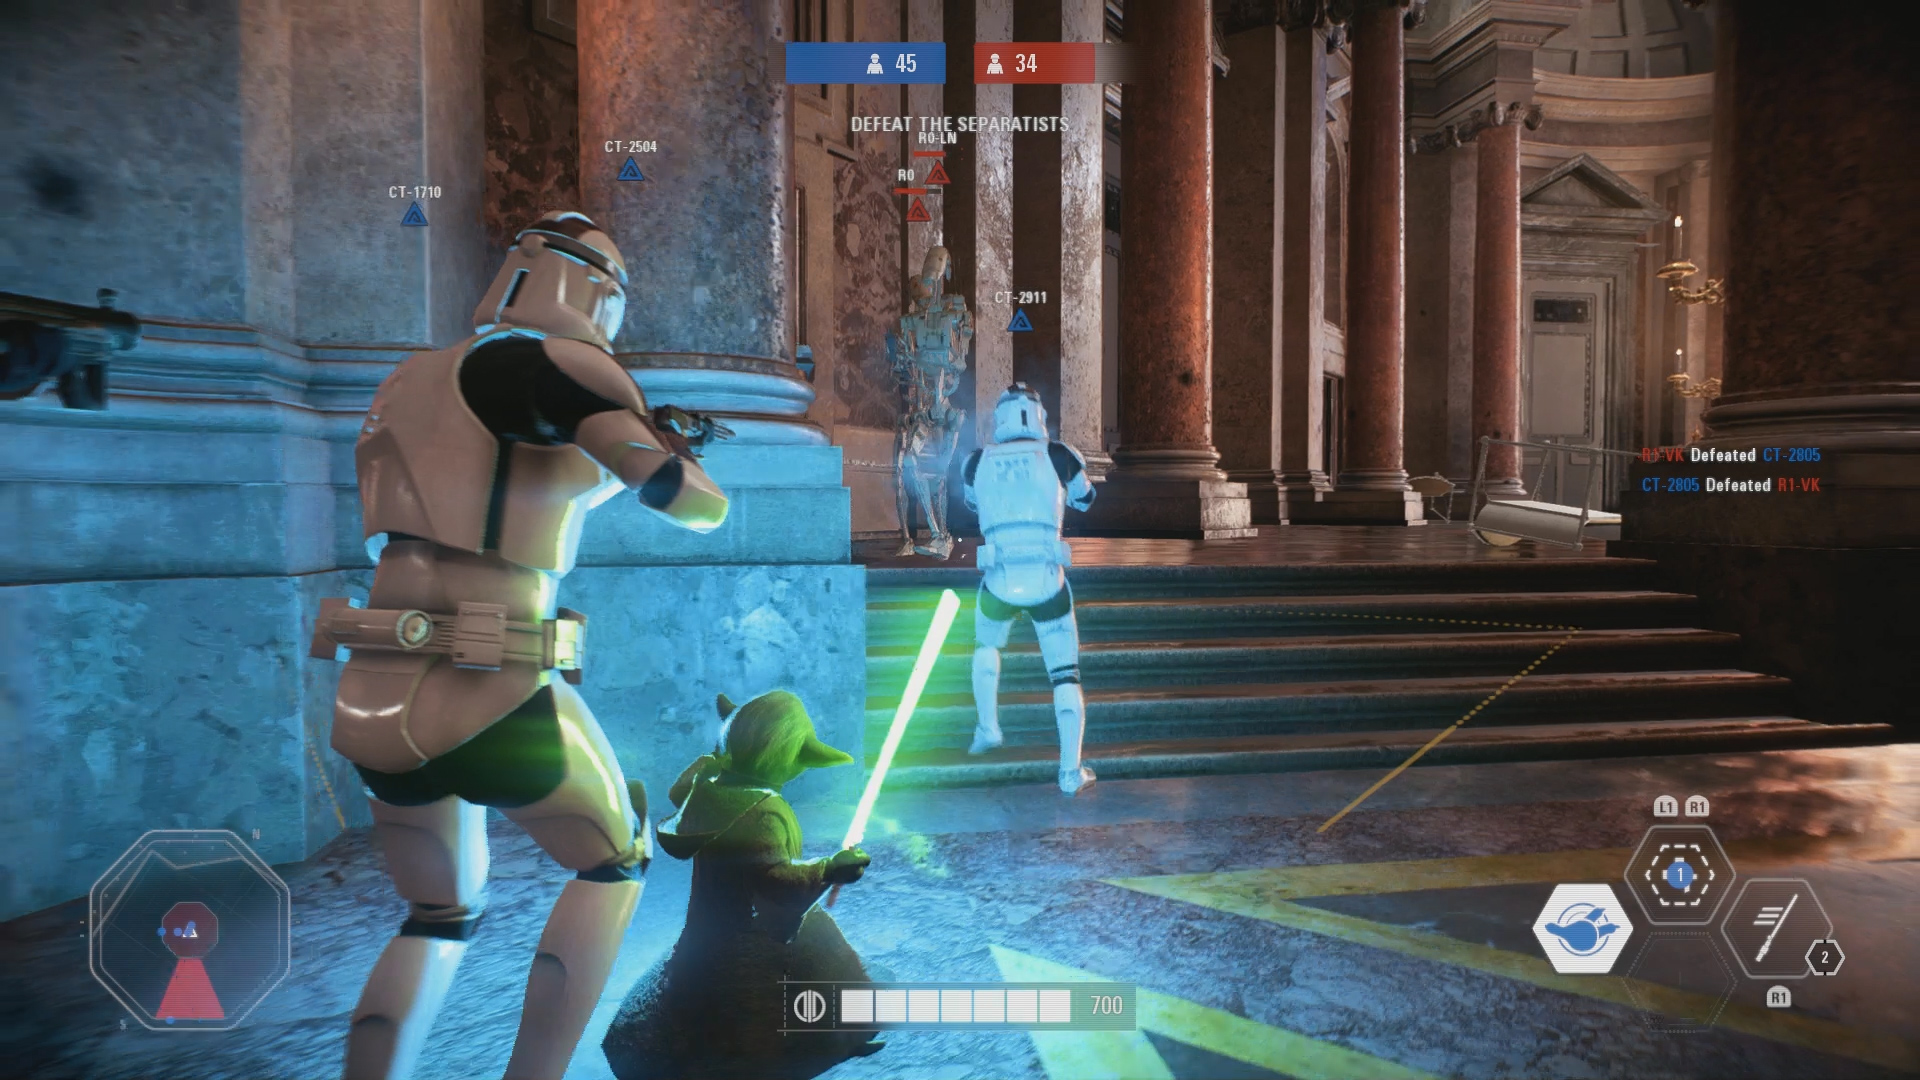 Star Wars: Battlefront II Game Review